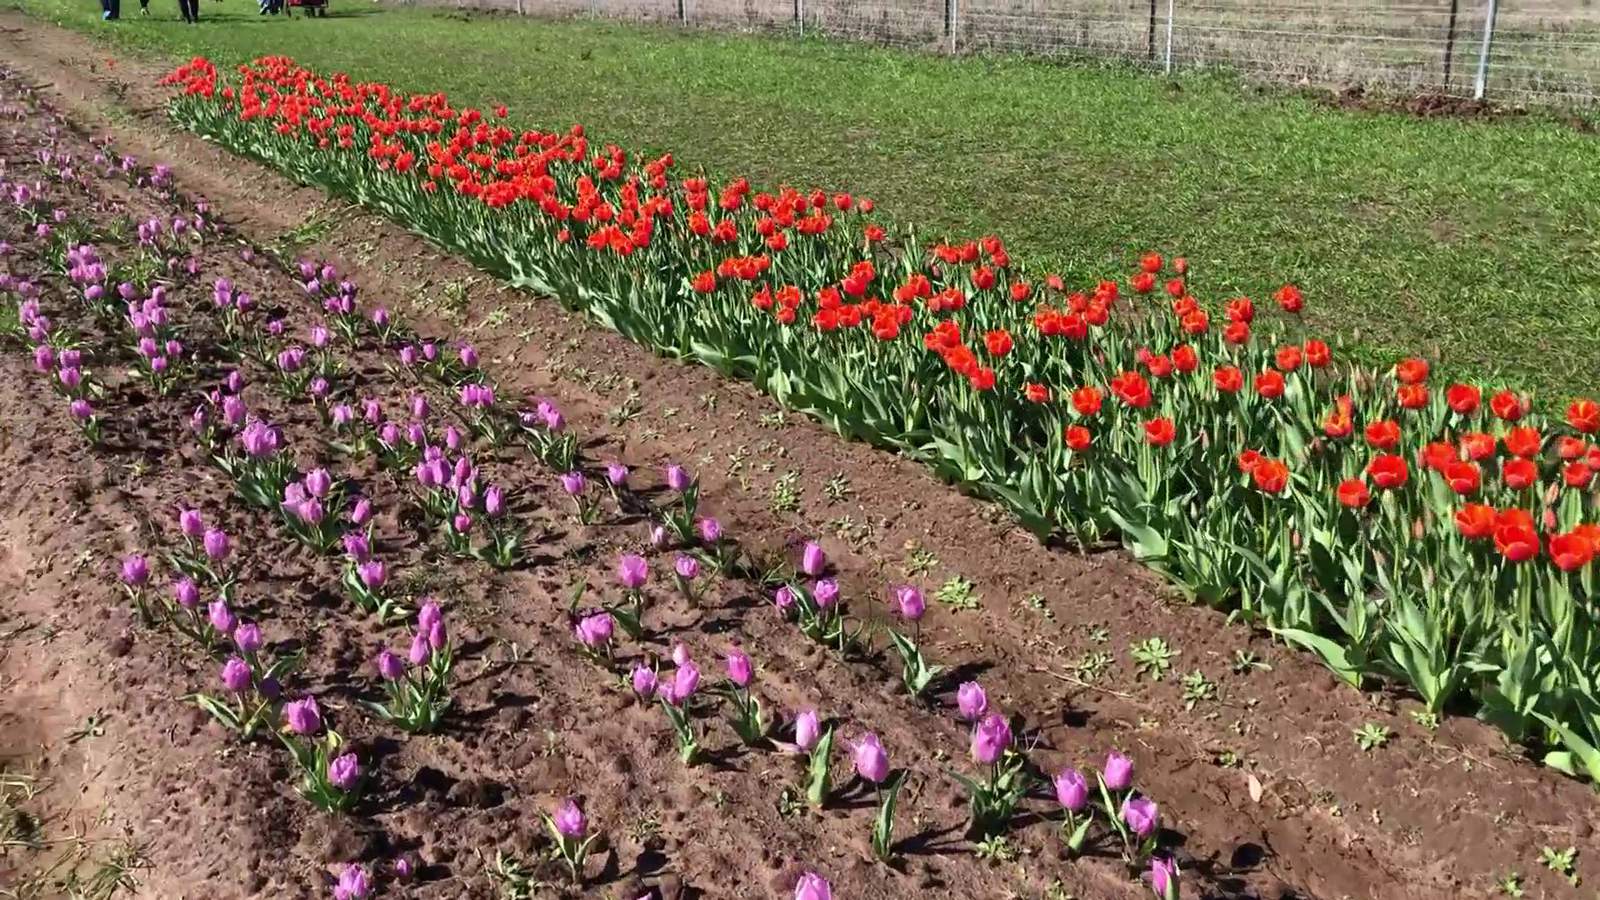 Here’s what to expect when you visit San Antonio-area tulip field